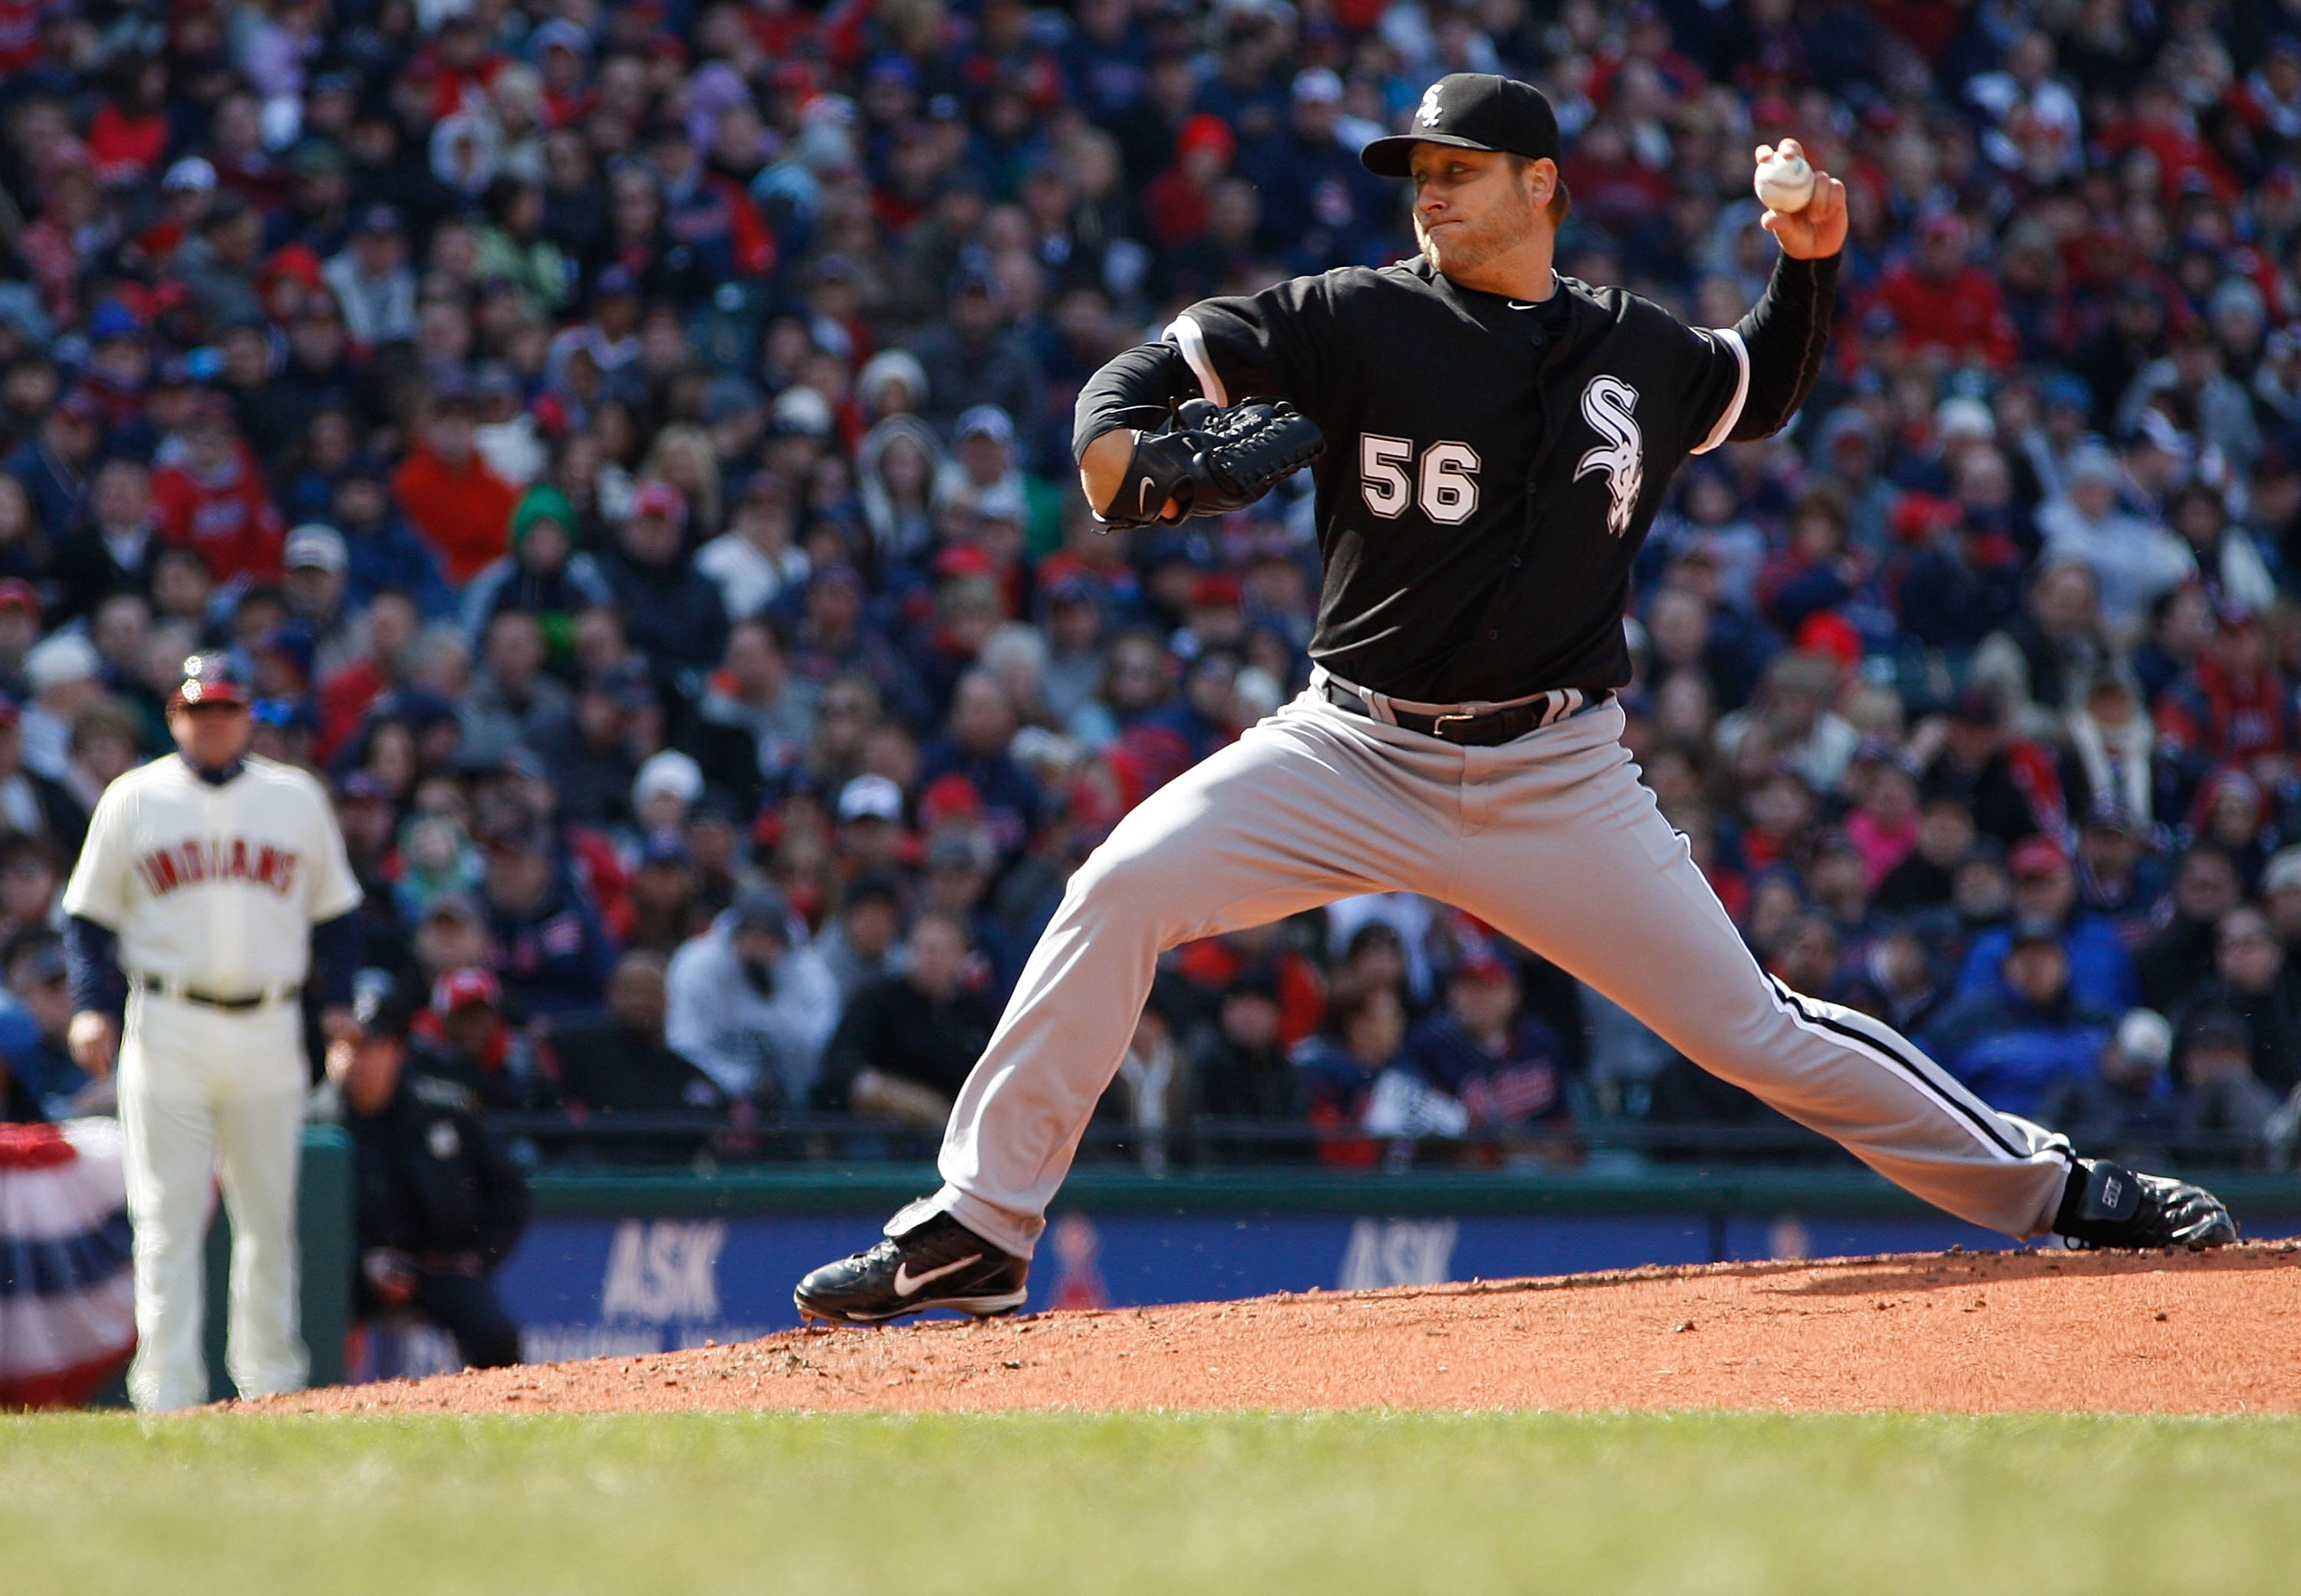 White Sox to retire pitcher Mark Buehrle's number